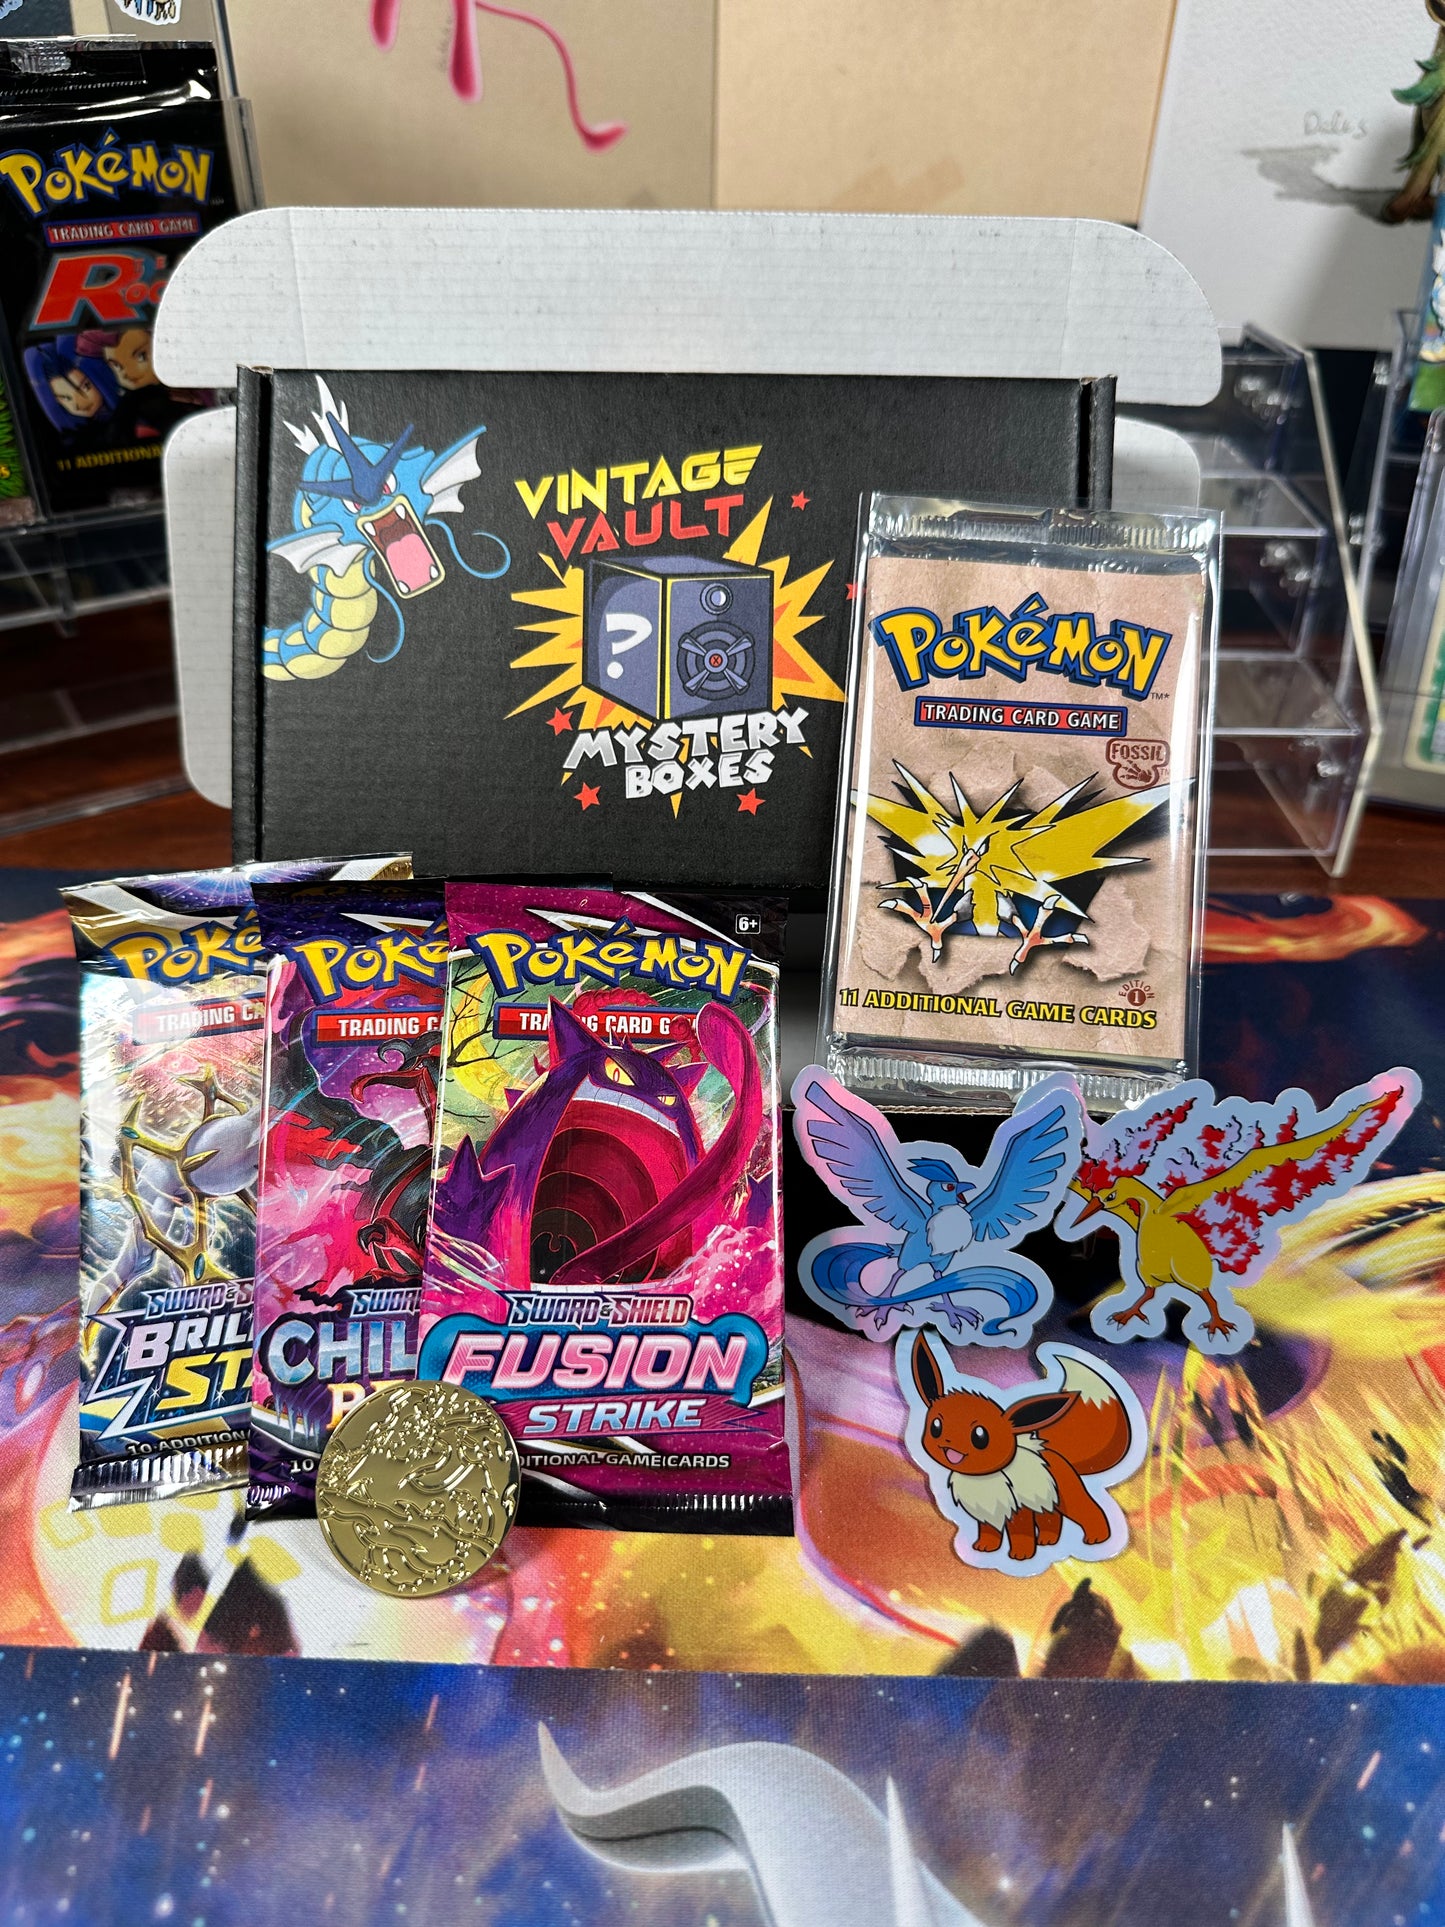 Mystery Box - Guaranteed WoTC Booster Pack in every box!! - Round 2 - DM on Instagram @VintageVaultPokemon for discounts!